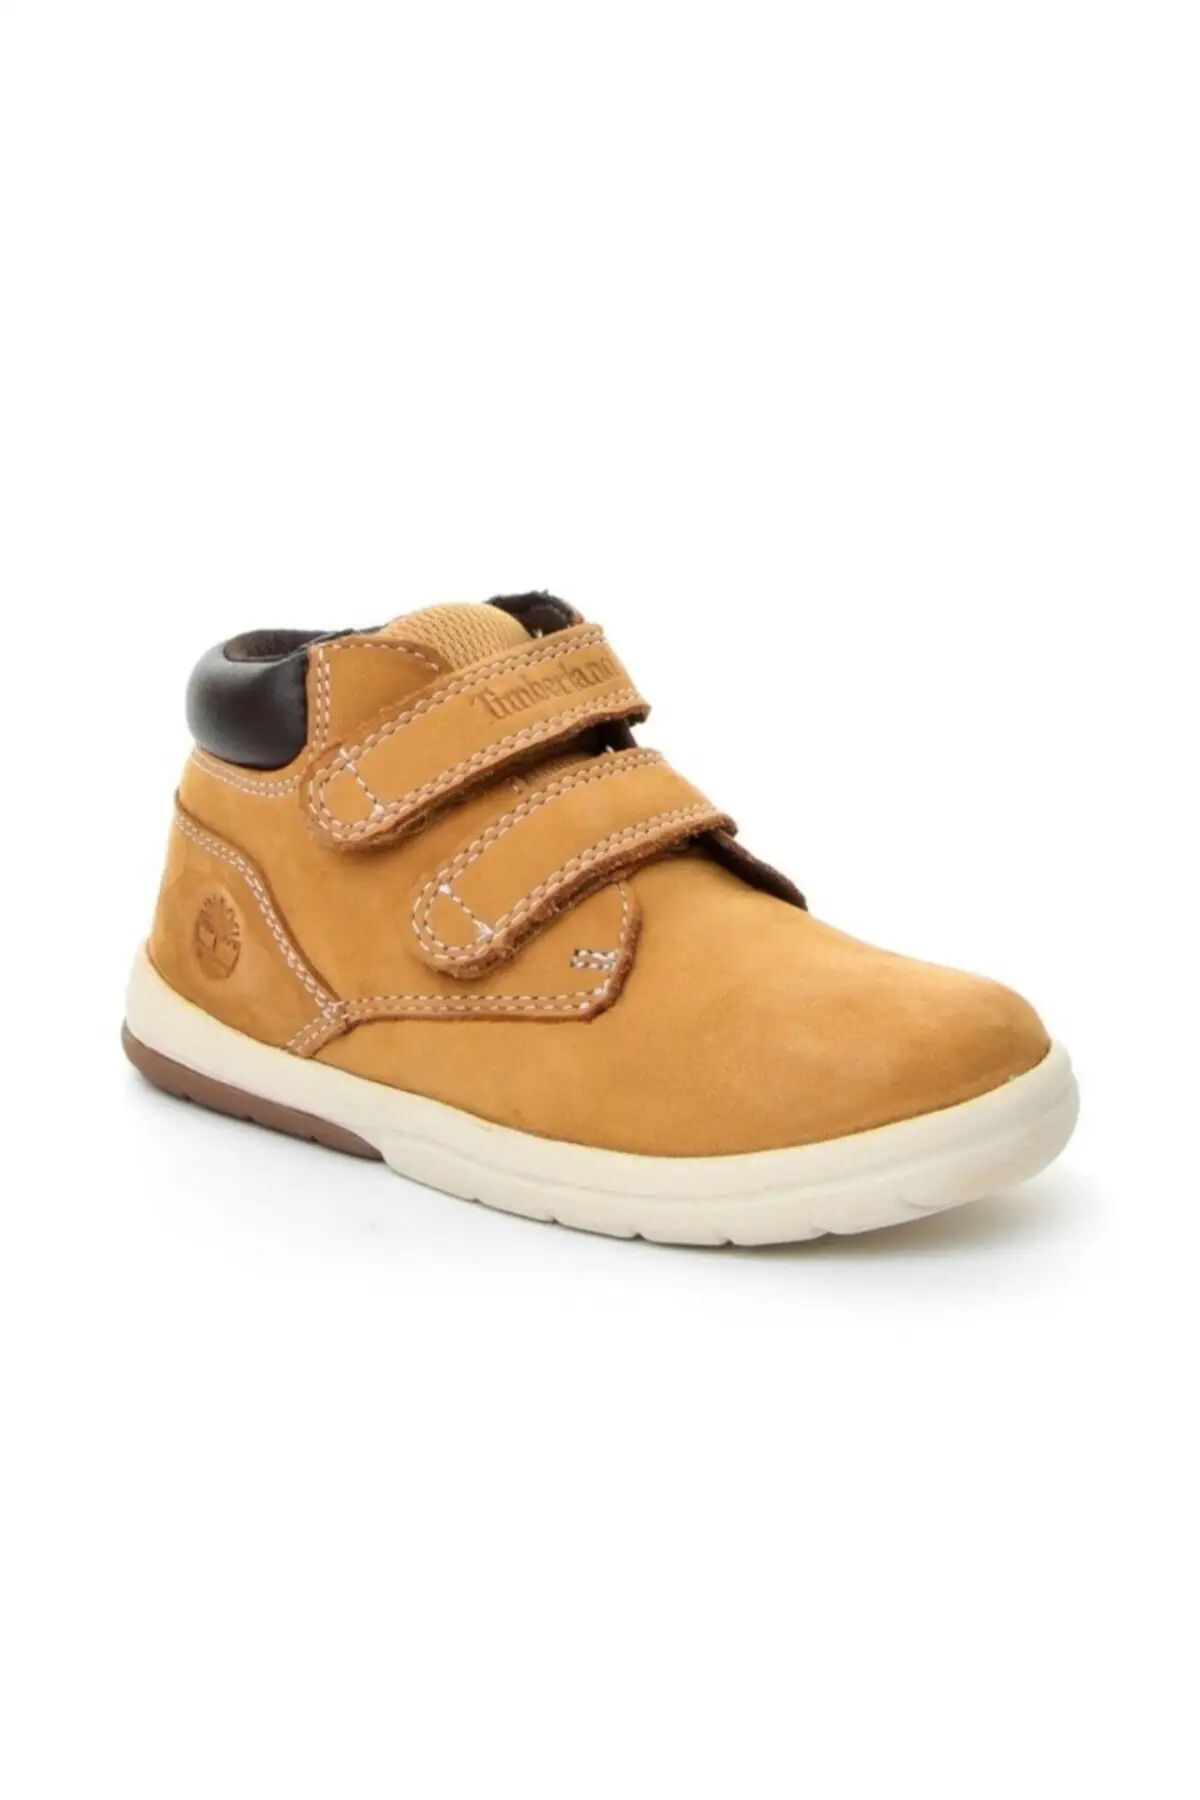 timberland boots for kids